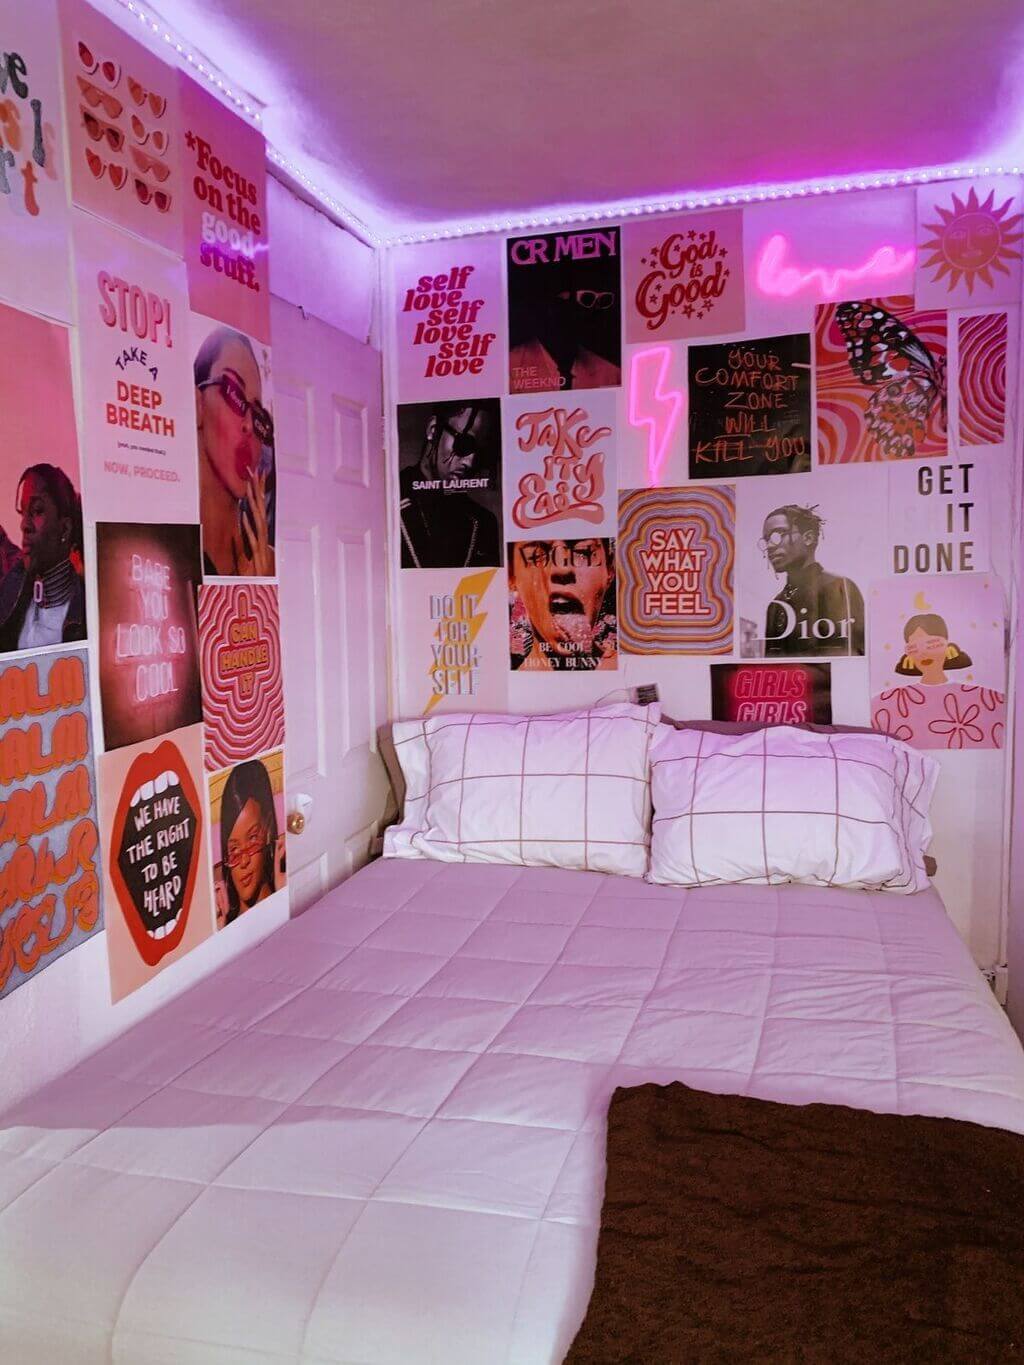 A bed with a pink comforter in a room with posters on the wall
